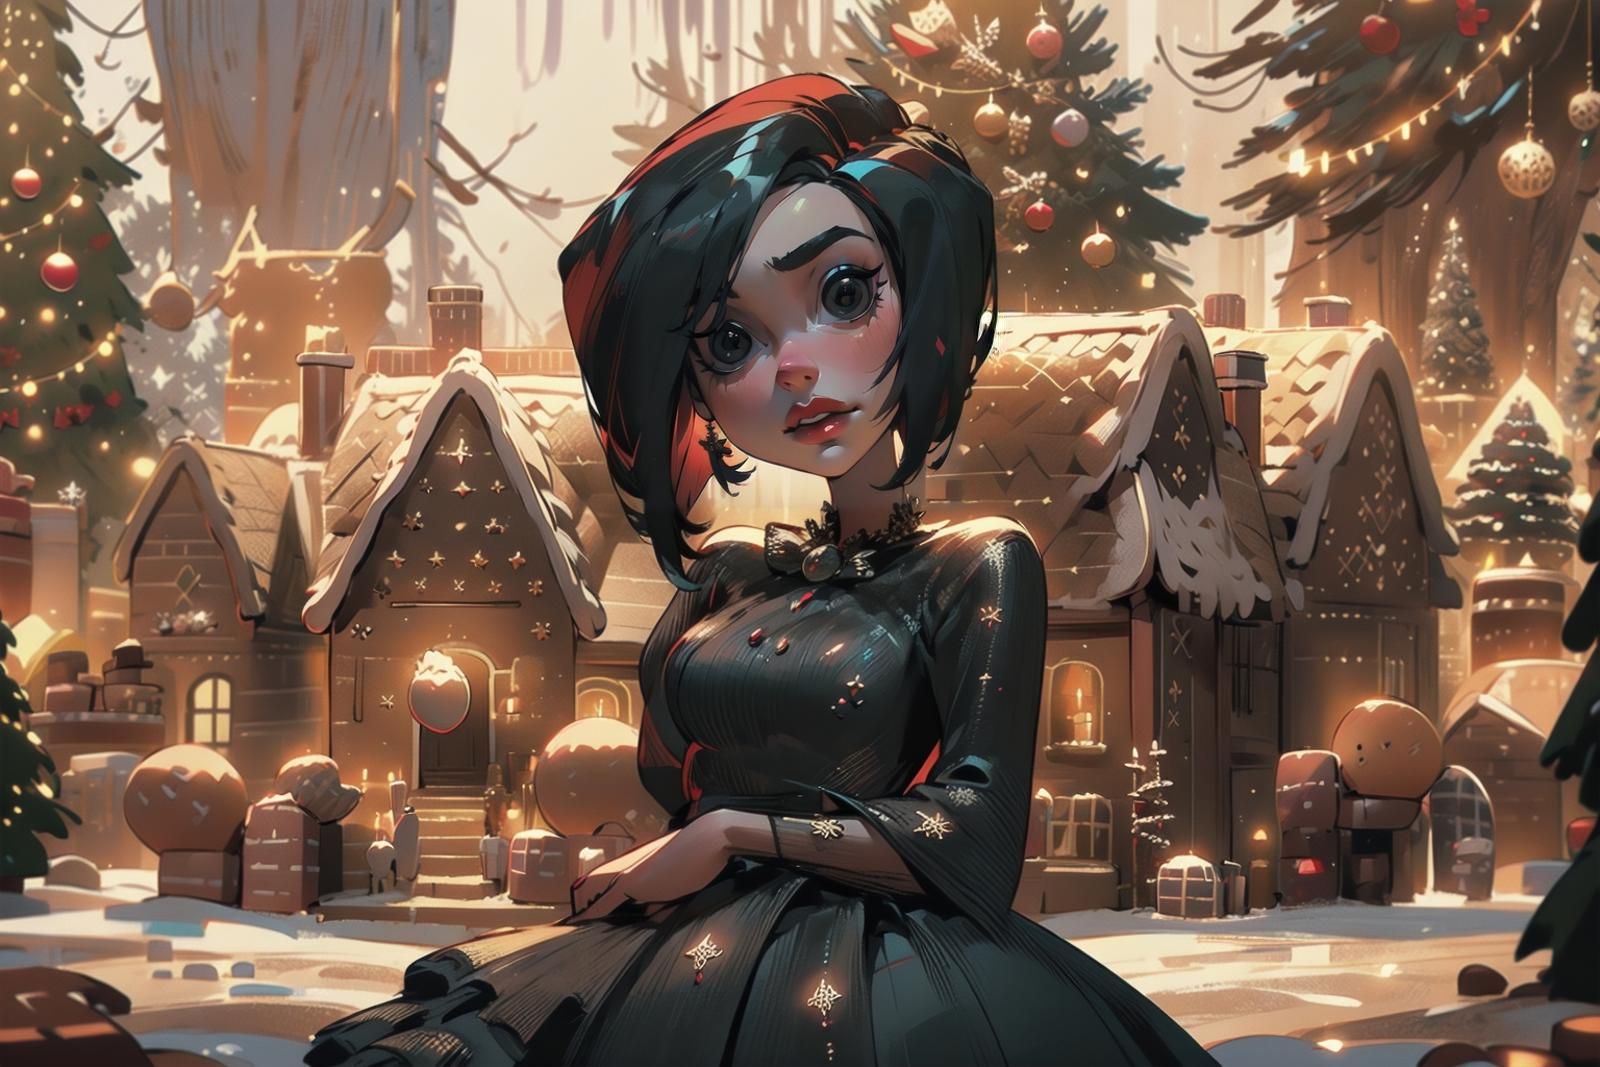 A girl in a black dress stands near a Christmas tree in a snowy village, with a Santa Claus figure in the background.